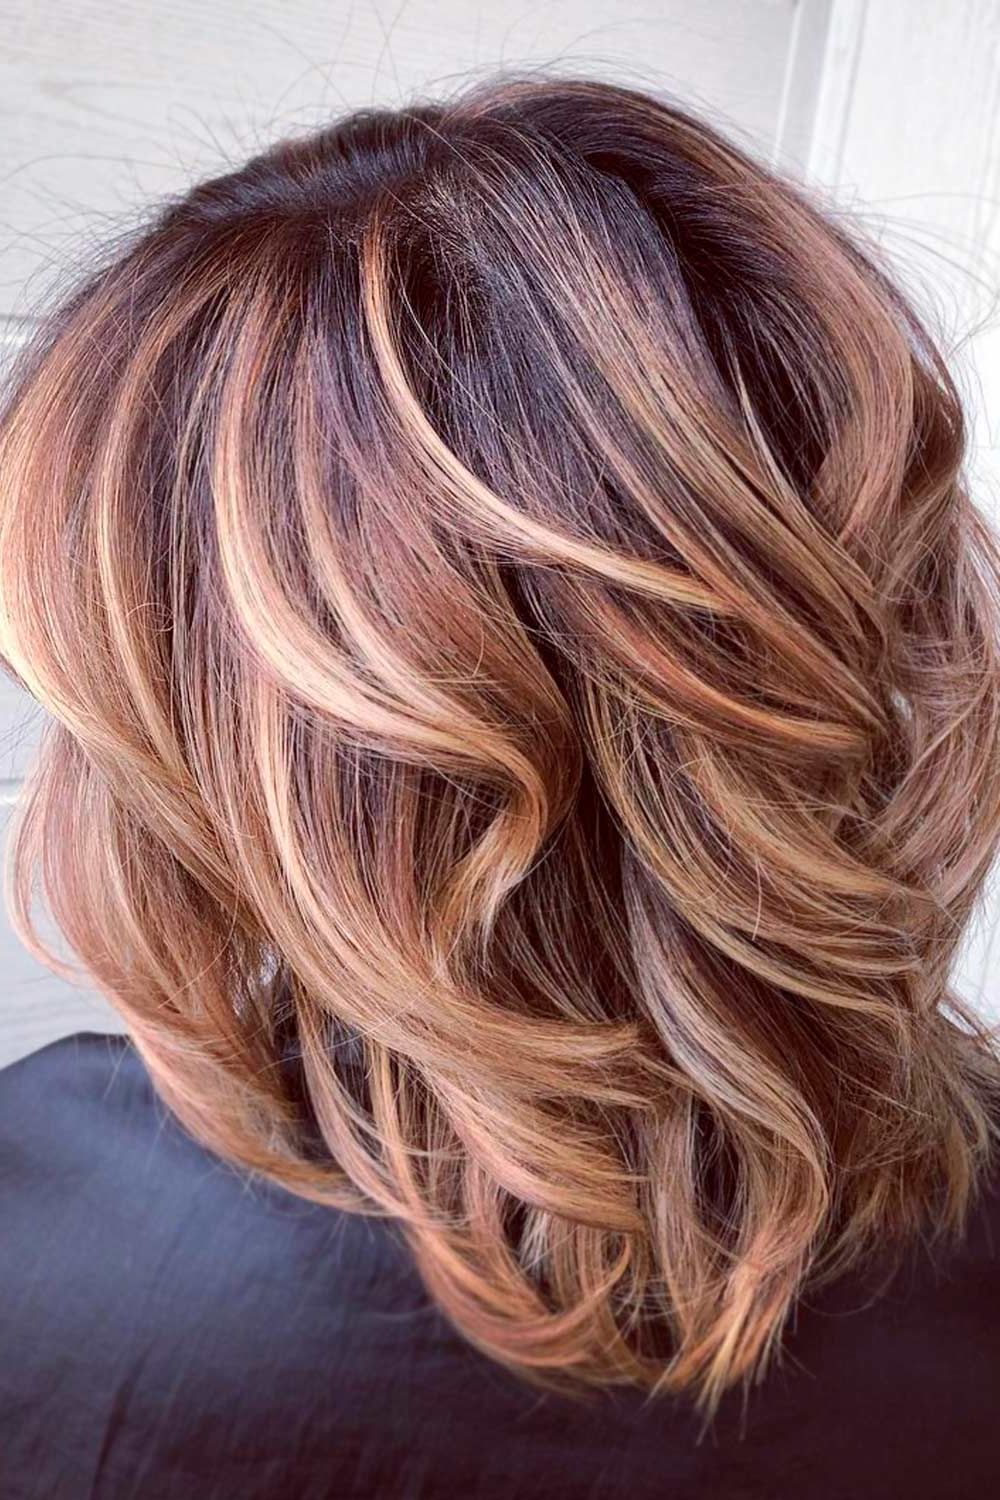 Preferred Wavy Lob Haircuts With Caramel Highlights With Untraditional Lob Haircut Ideas To Give A Try (View 17 of 20)